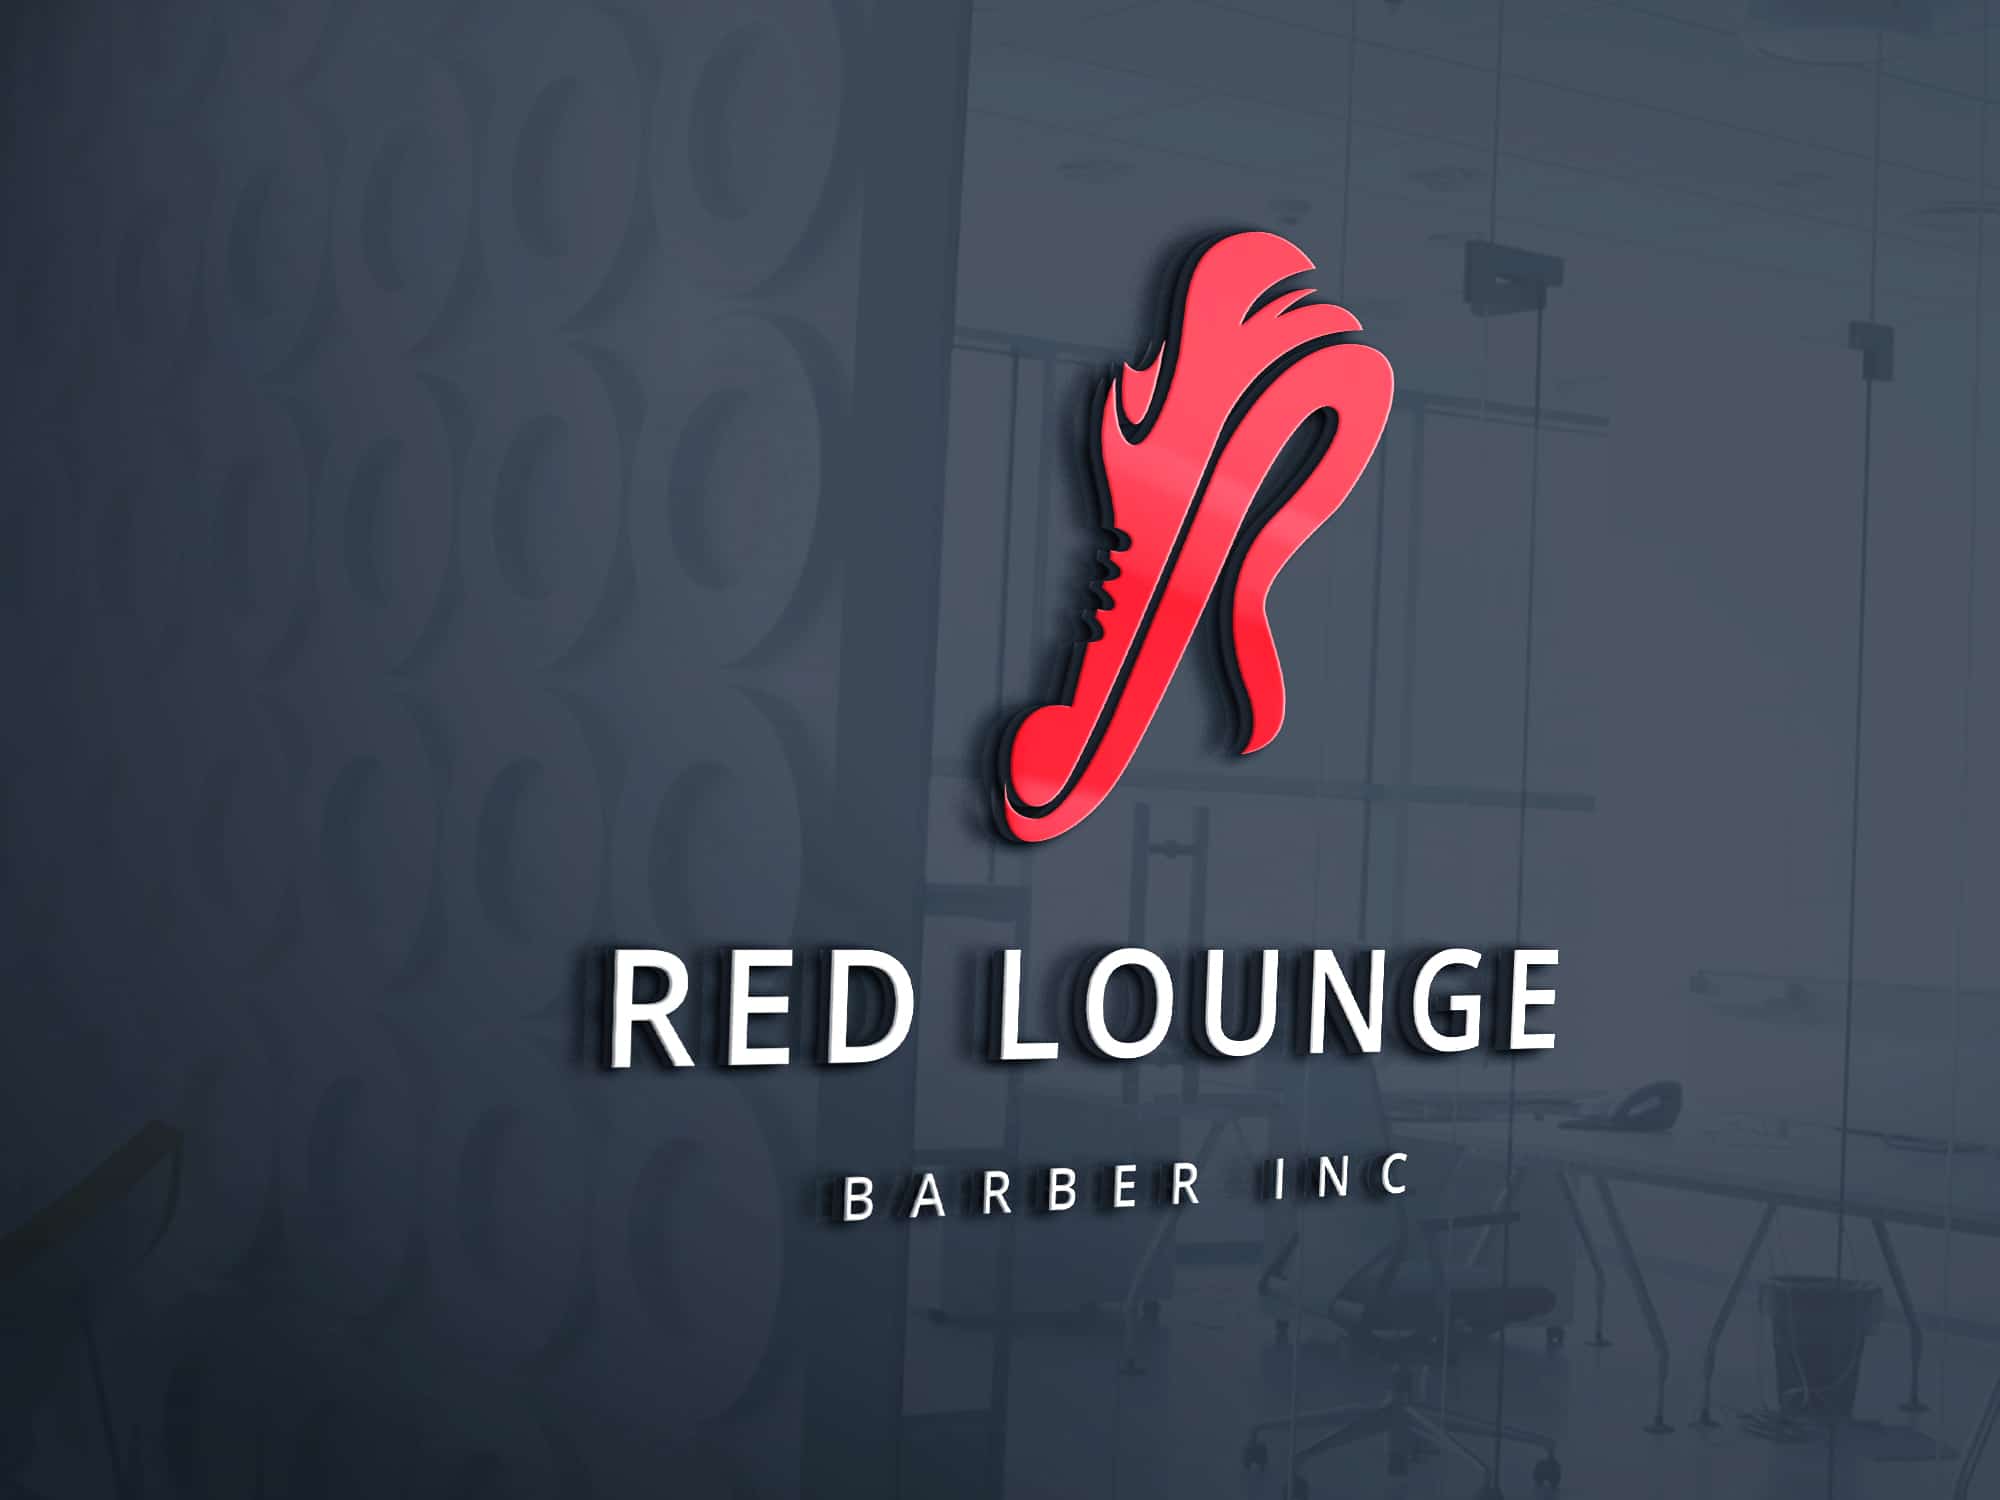 Red Lounge Barber Inc